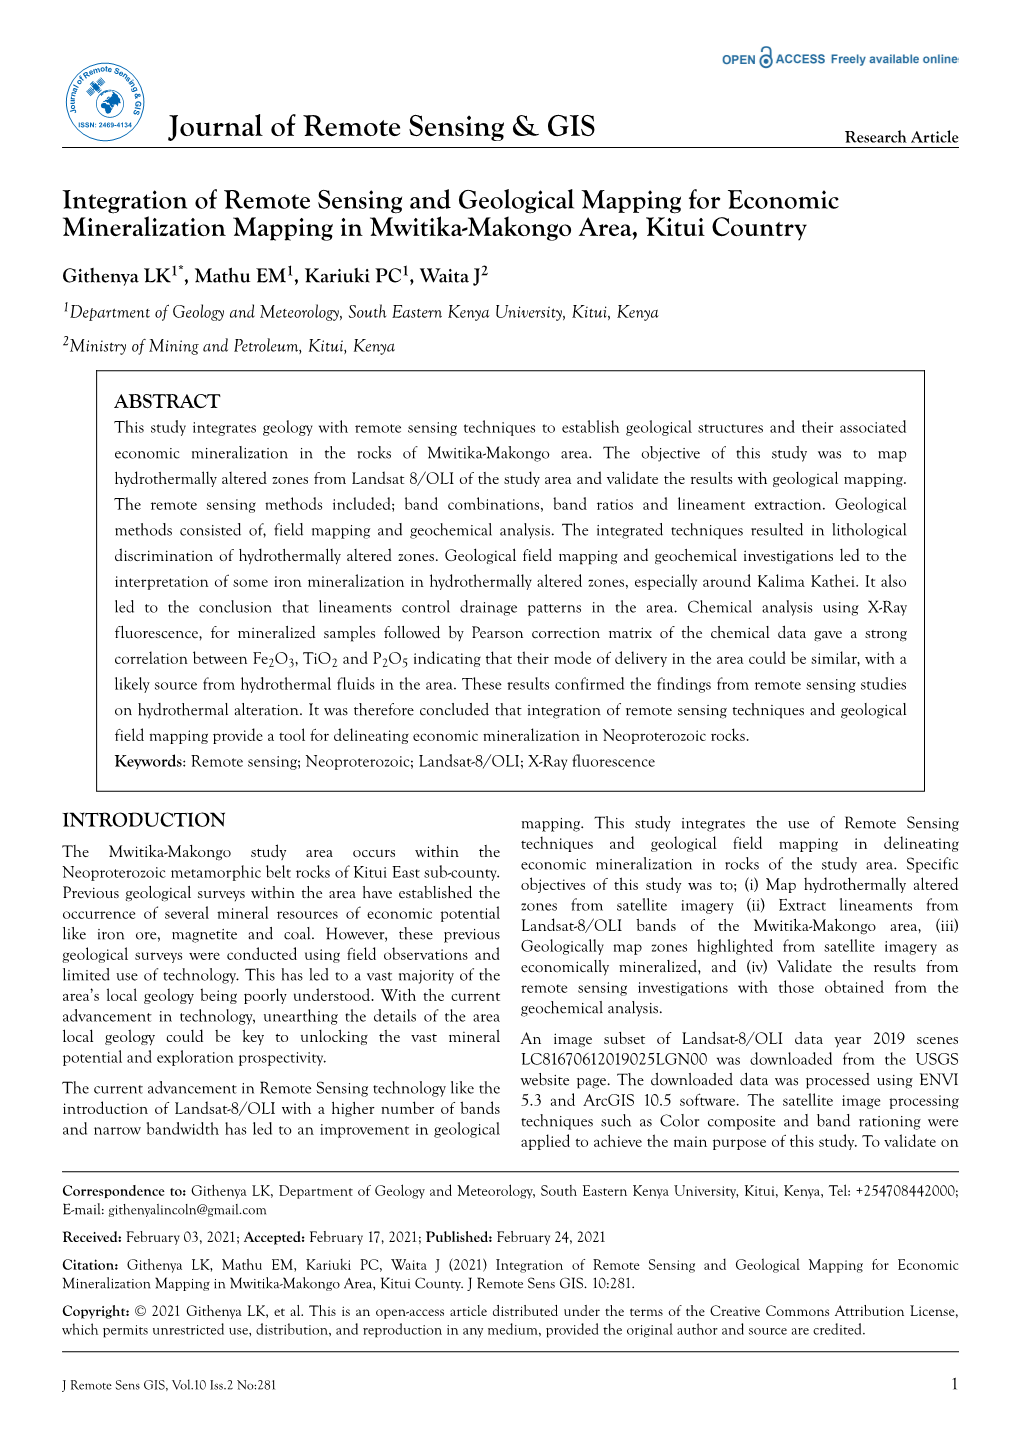 Integration of Remote Sensing and Geological Mapping for Economic Mineralization Mapping in Mwitika-Makongo Area, Kitui Country